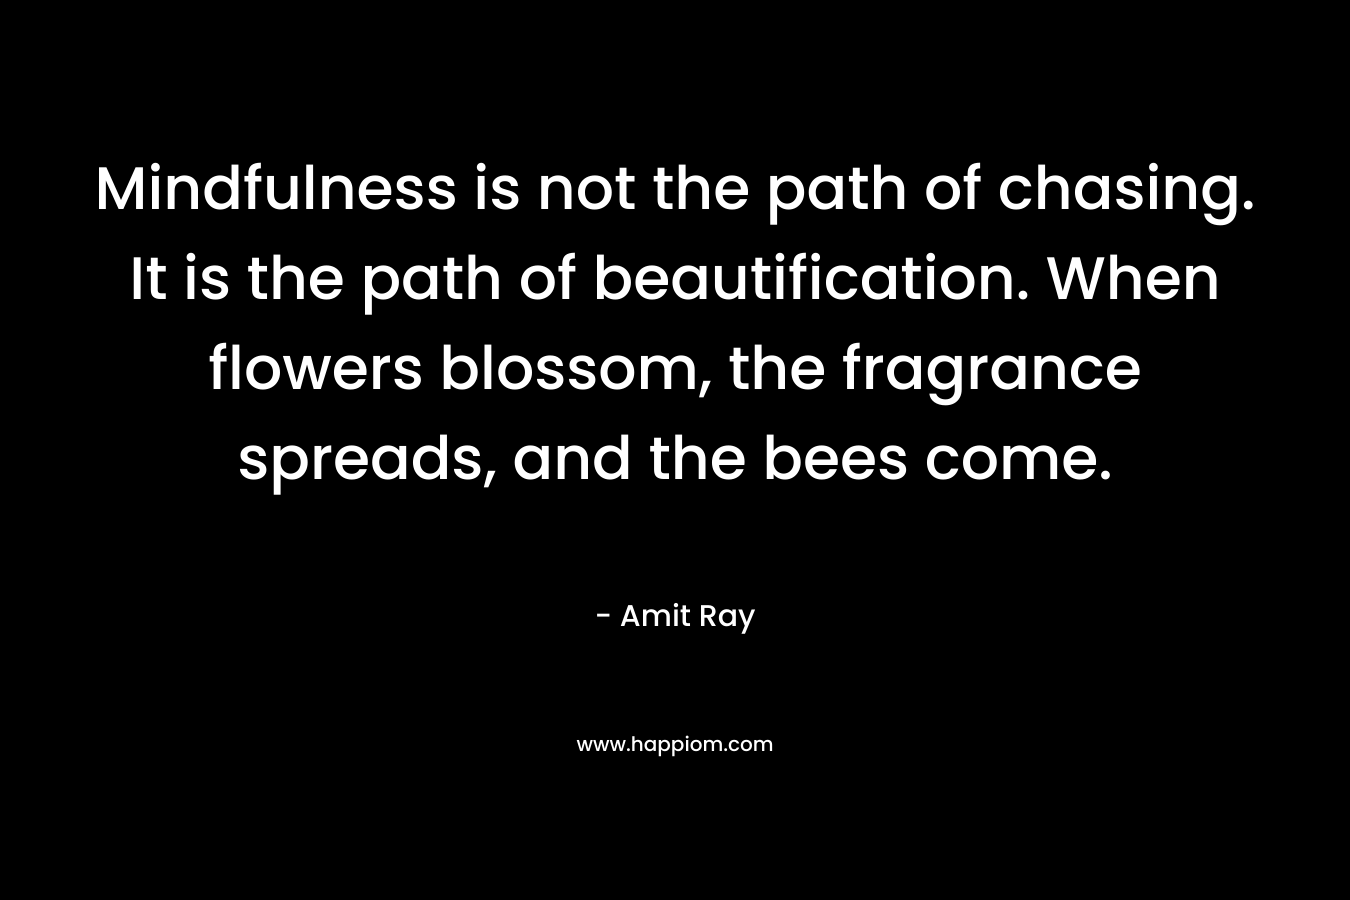 Mindfulness is not the path of chasing. It is the path of beautification. When flowers blossom, the fragrance spreads, and the bees come.